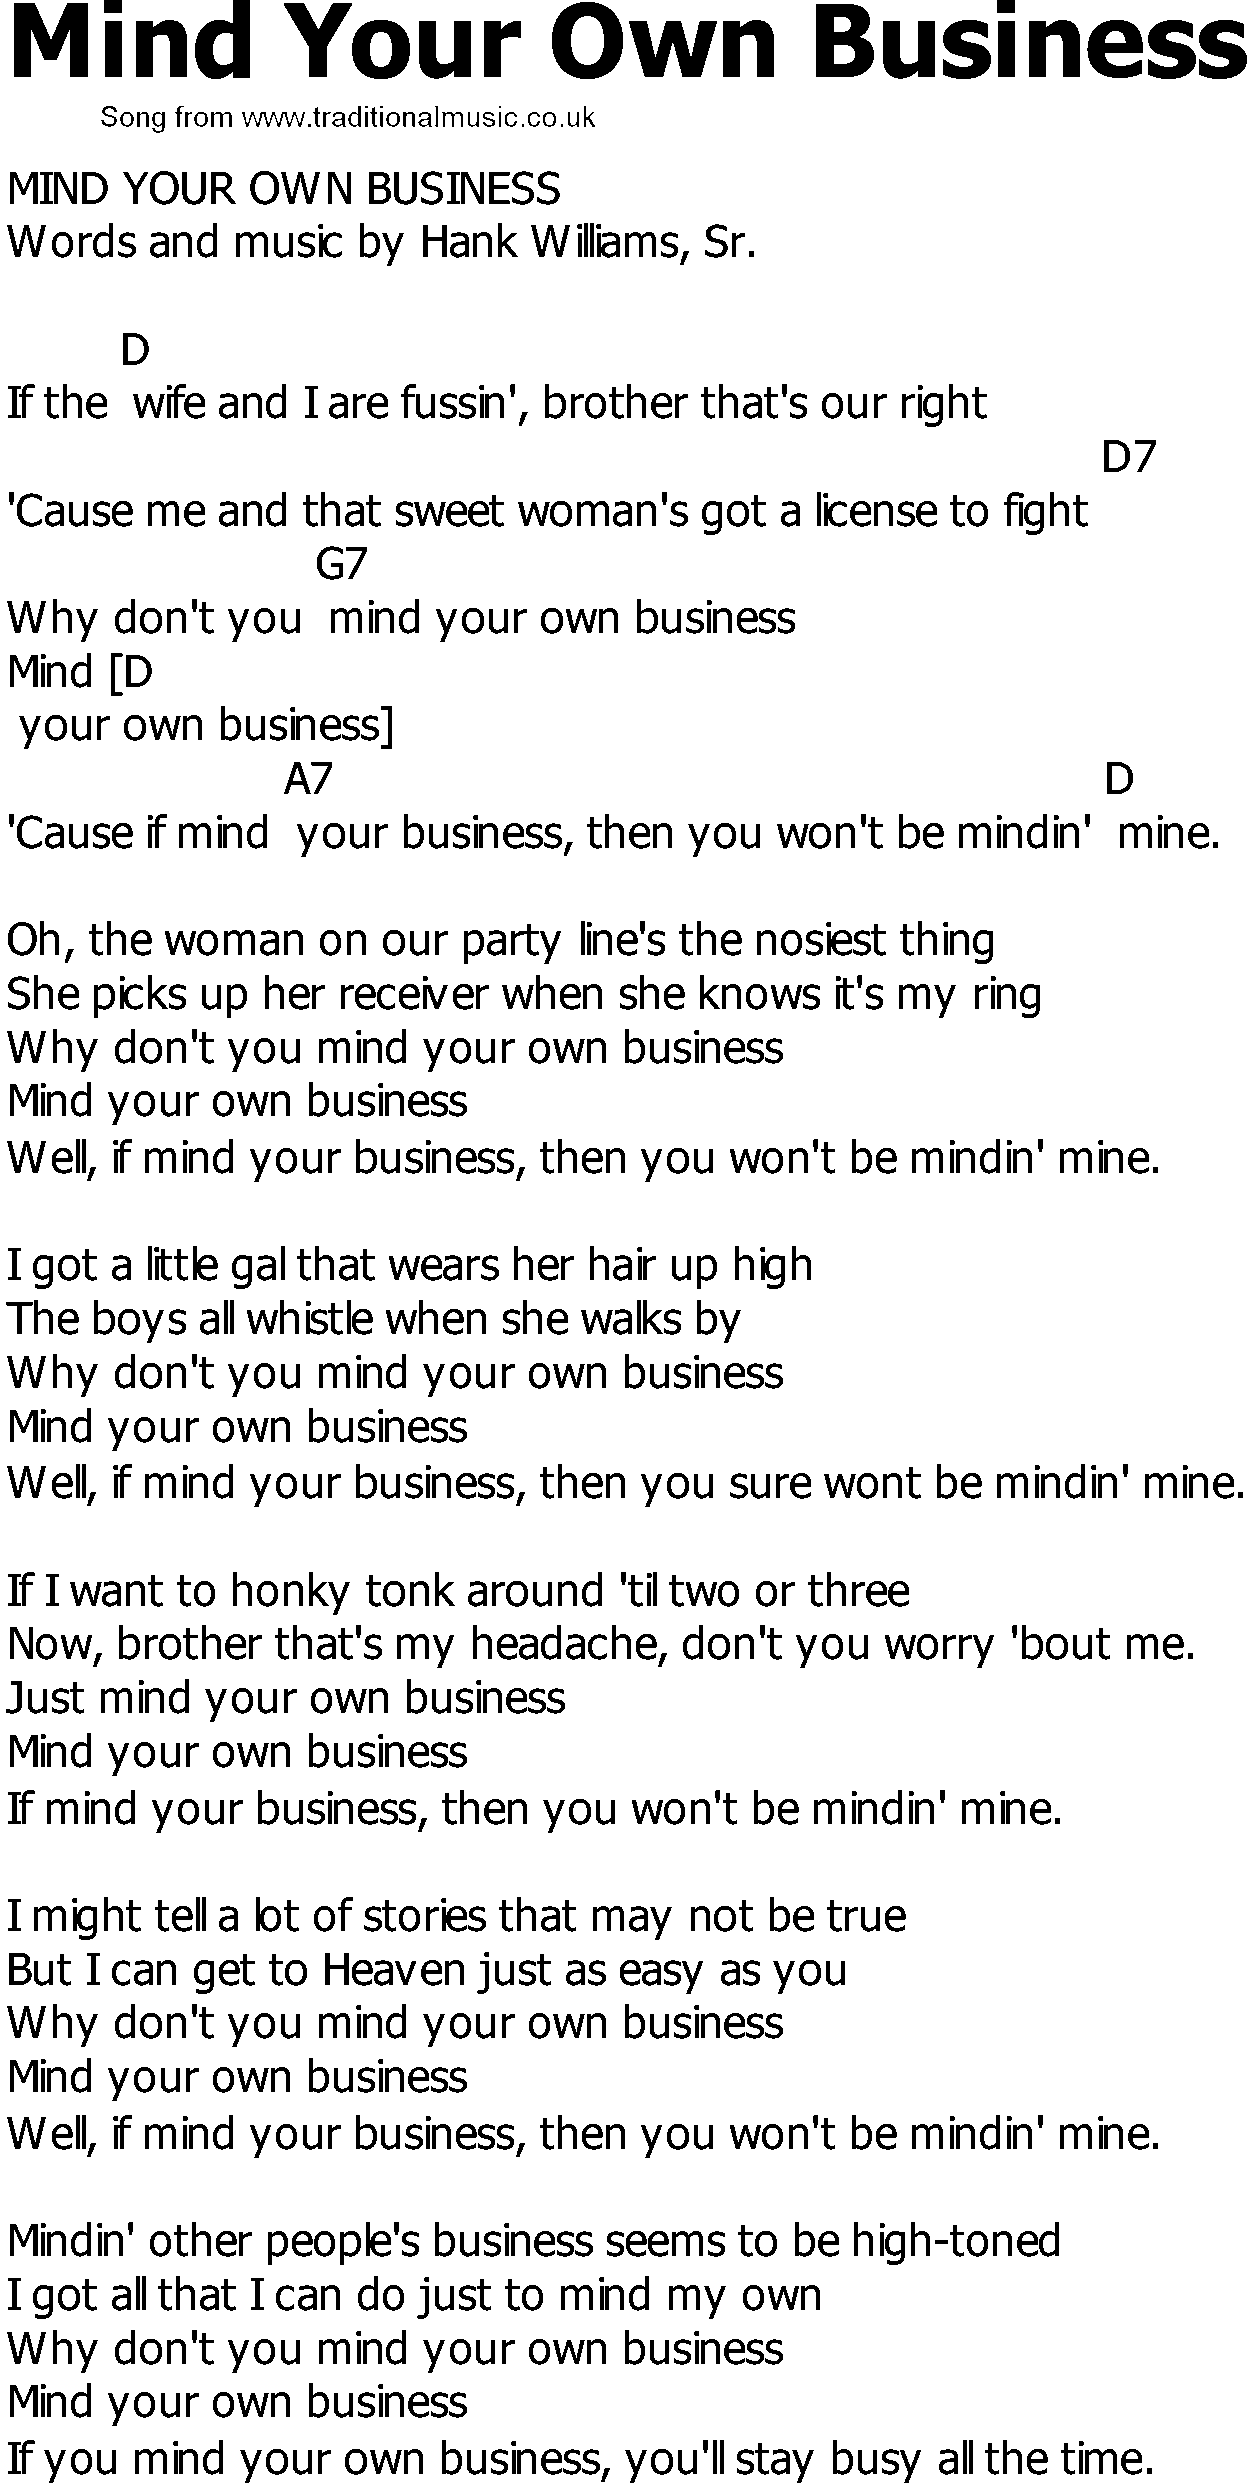 Old Country song lyrics with chords - Mind Your Own Business